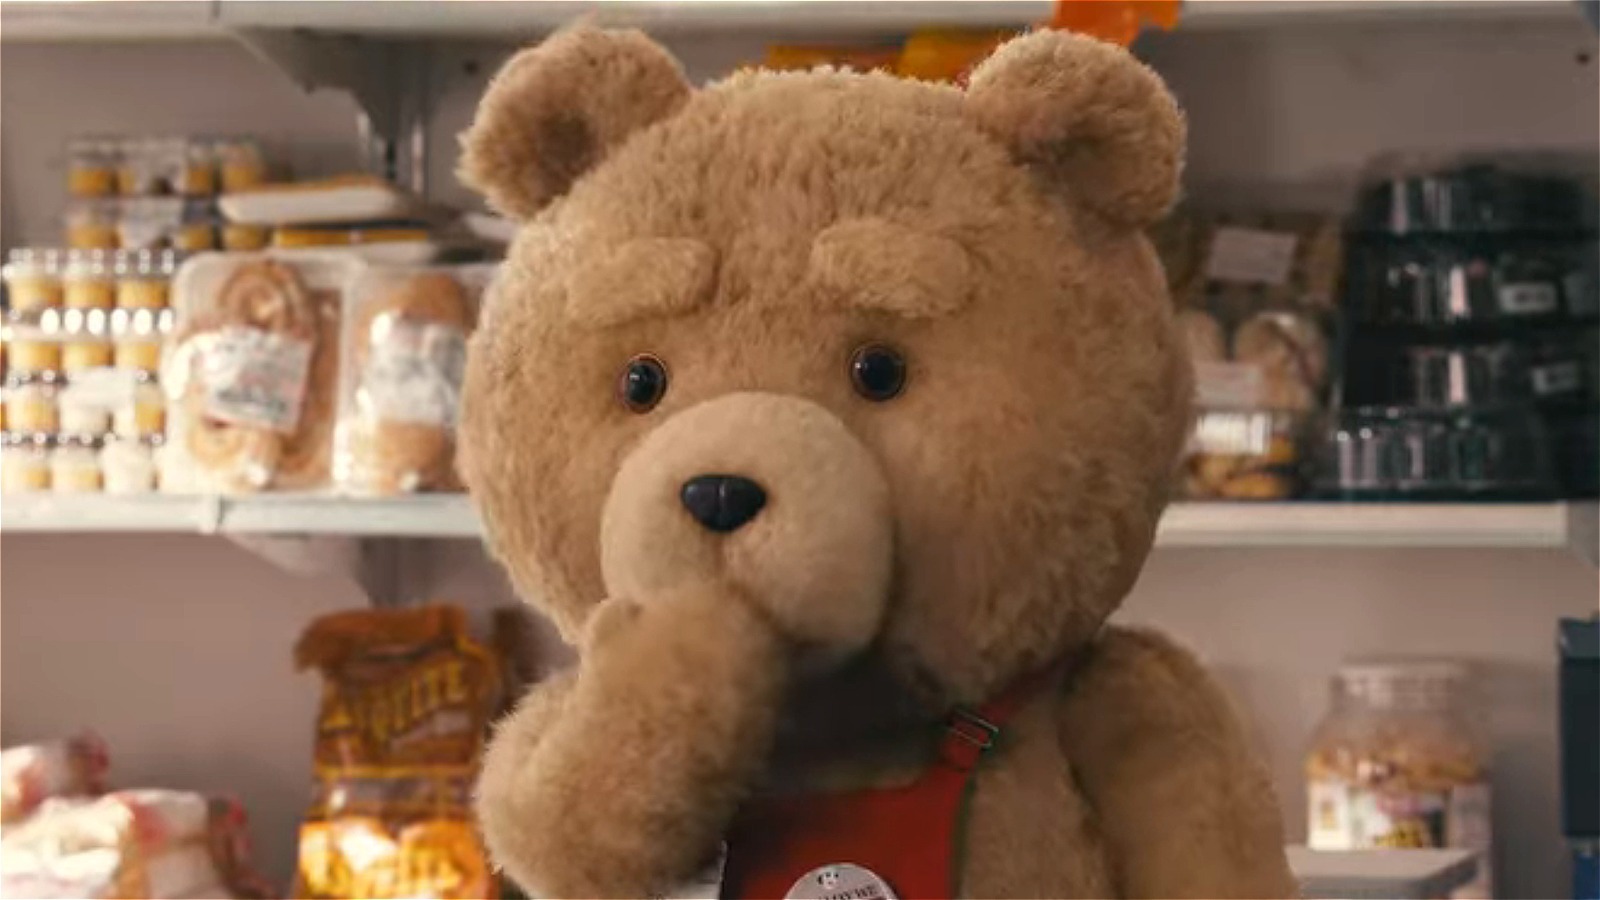 Why Is Ted Rated R? Here’s What Parents Should Know Before Letting Their Kids Watch – Looper